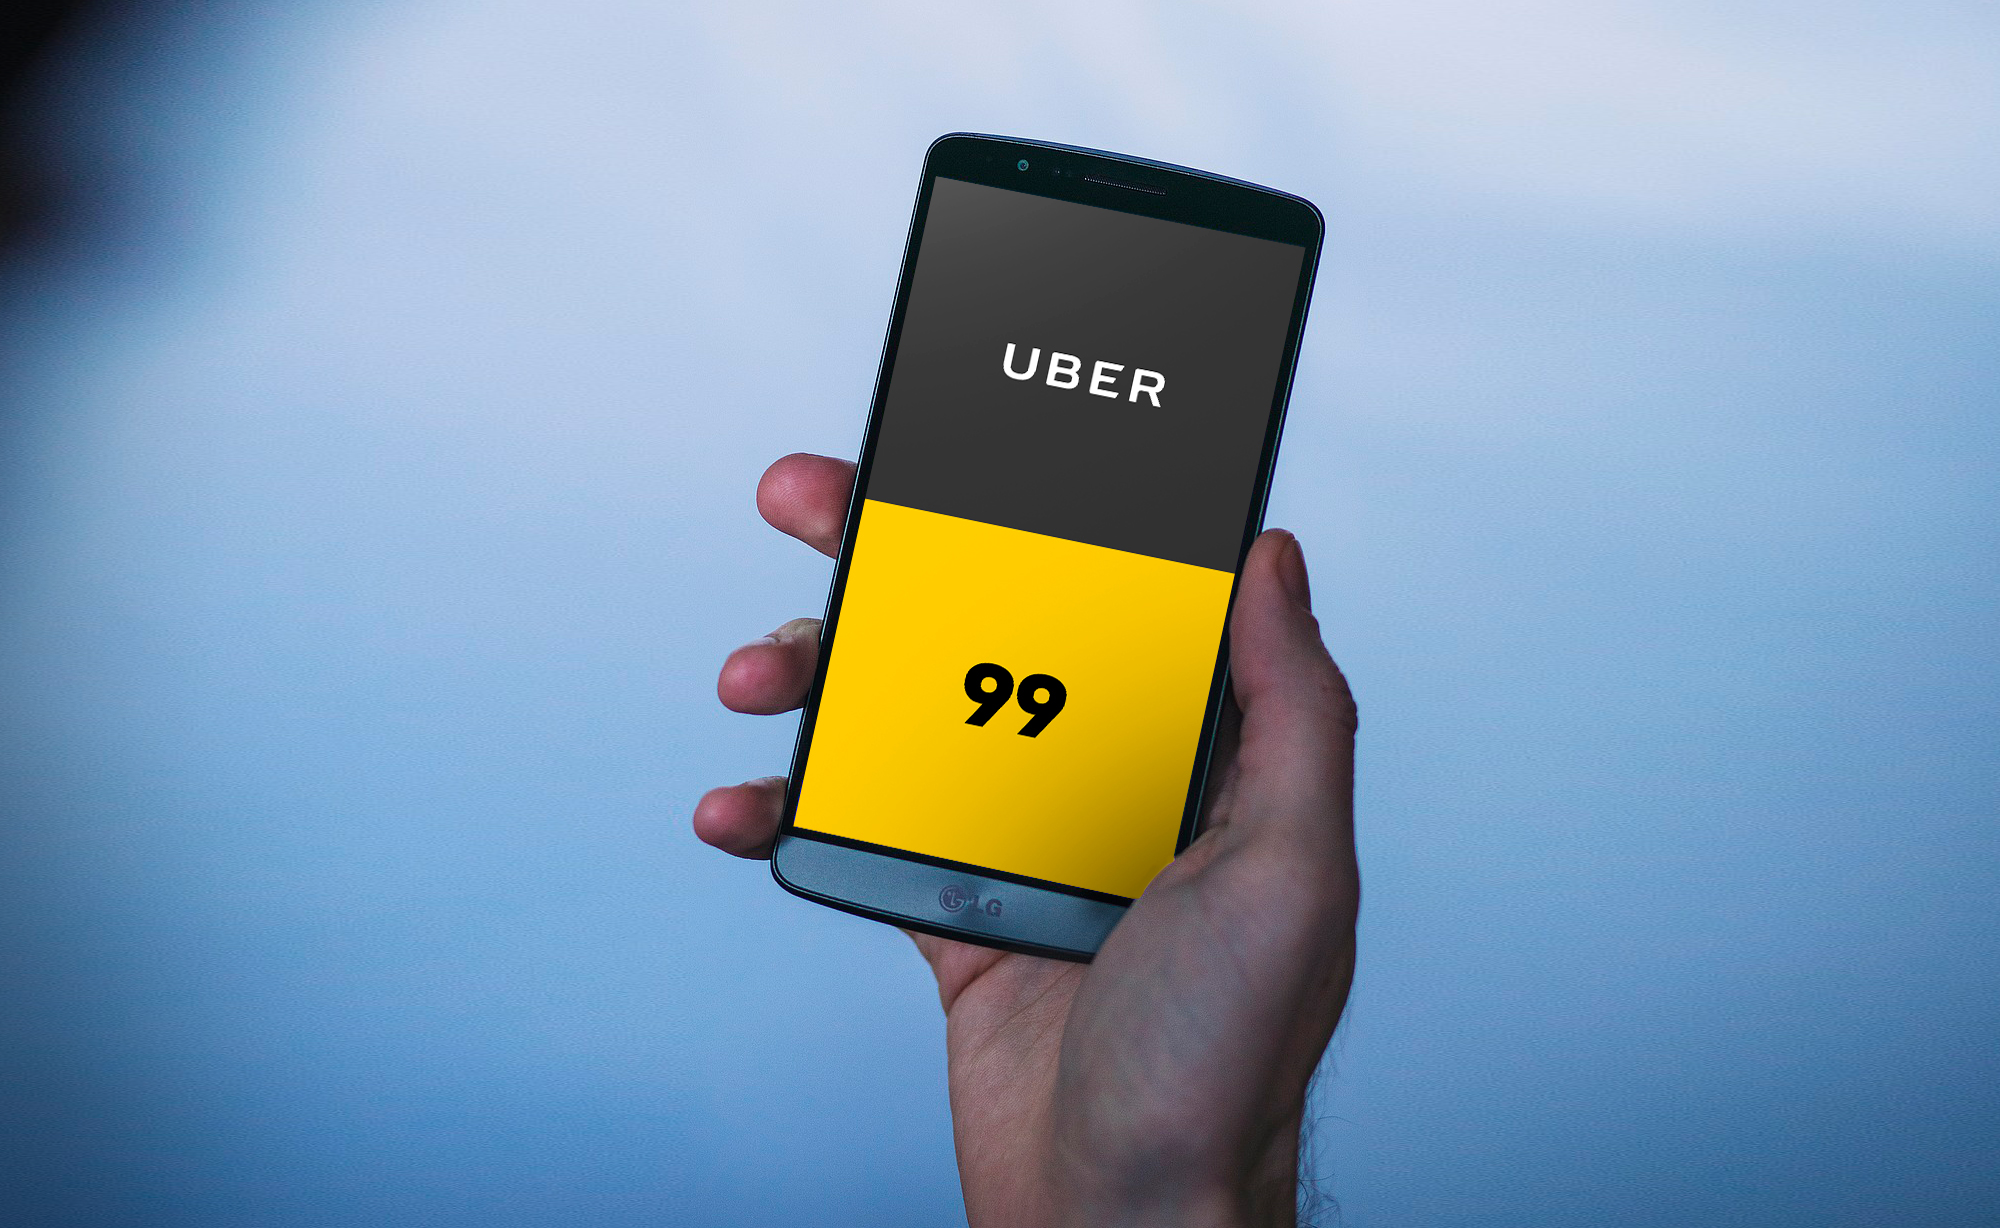 99 asserted that private passenger transport service is in accordance with the legislation. Uber stated that its shared mode complements public transport.